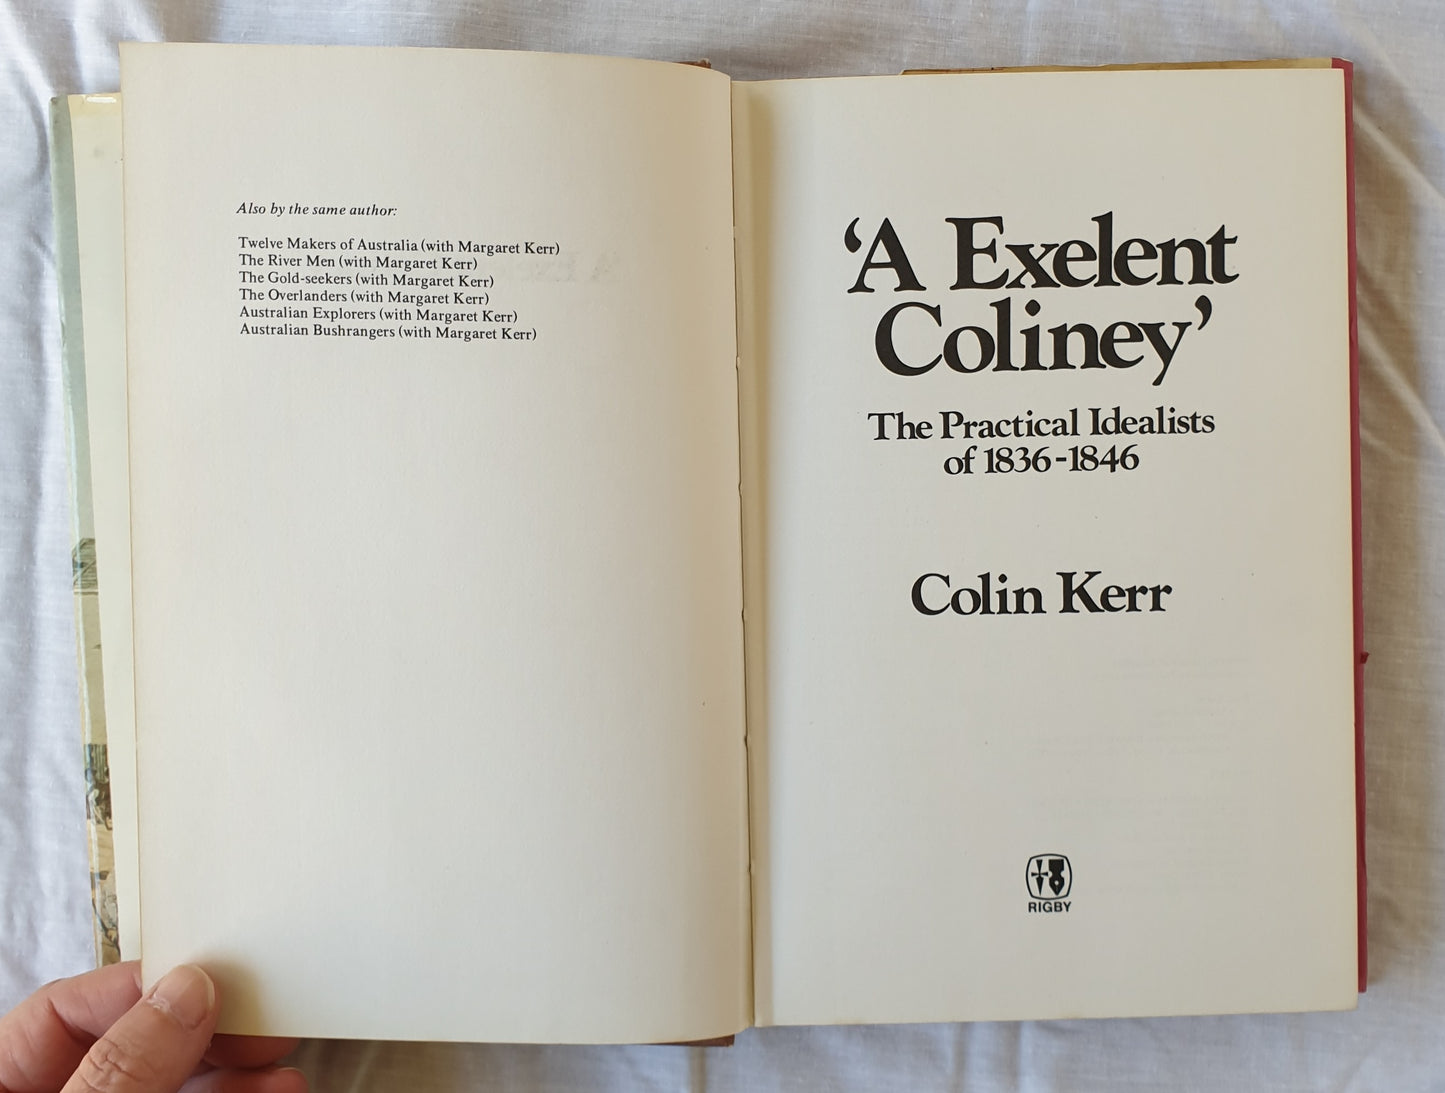 ‘A Exelent Coliney’ by Colin Kerr